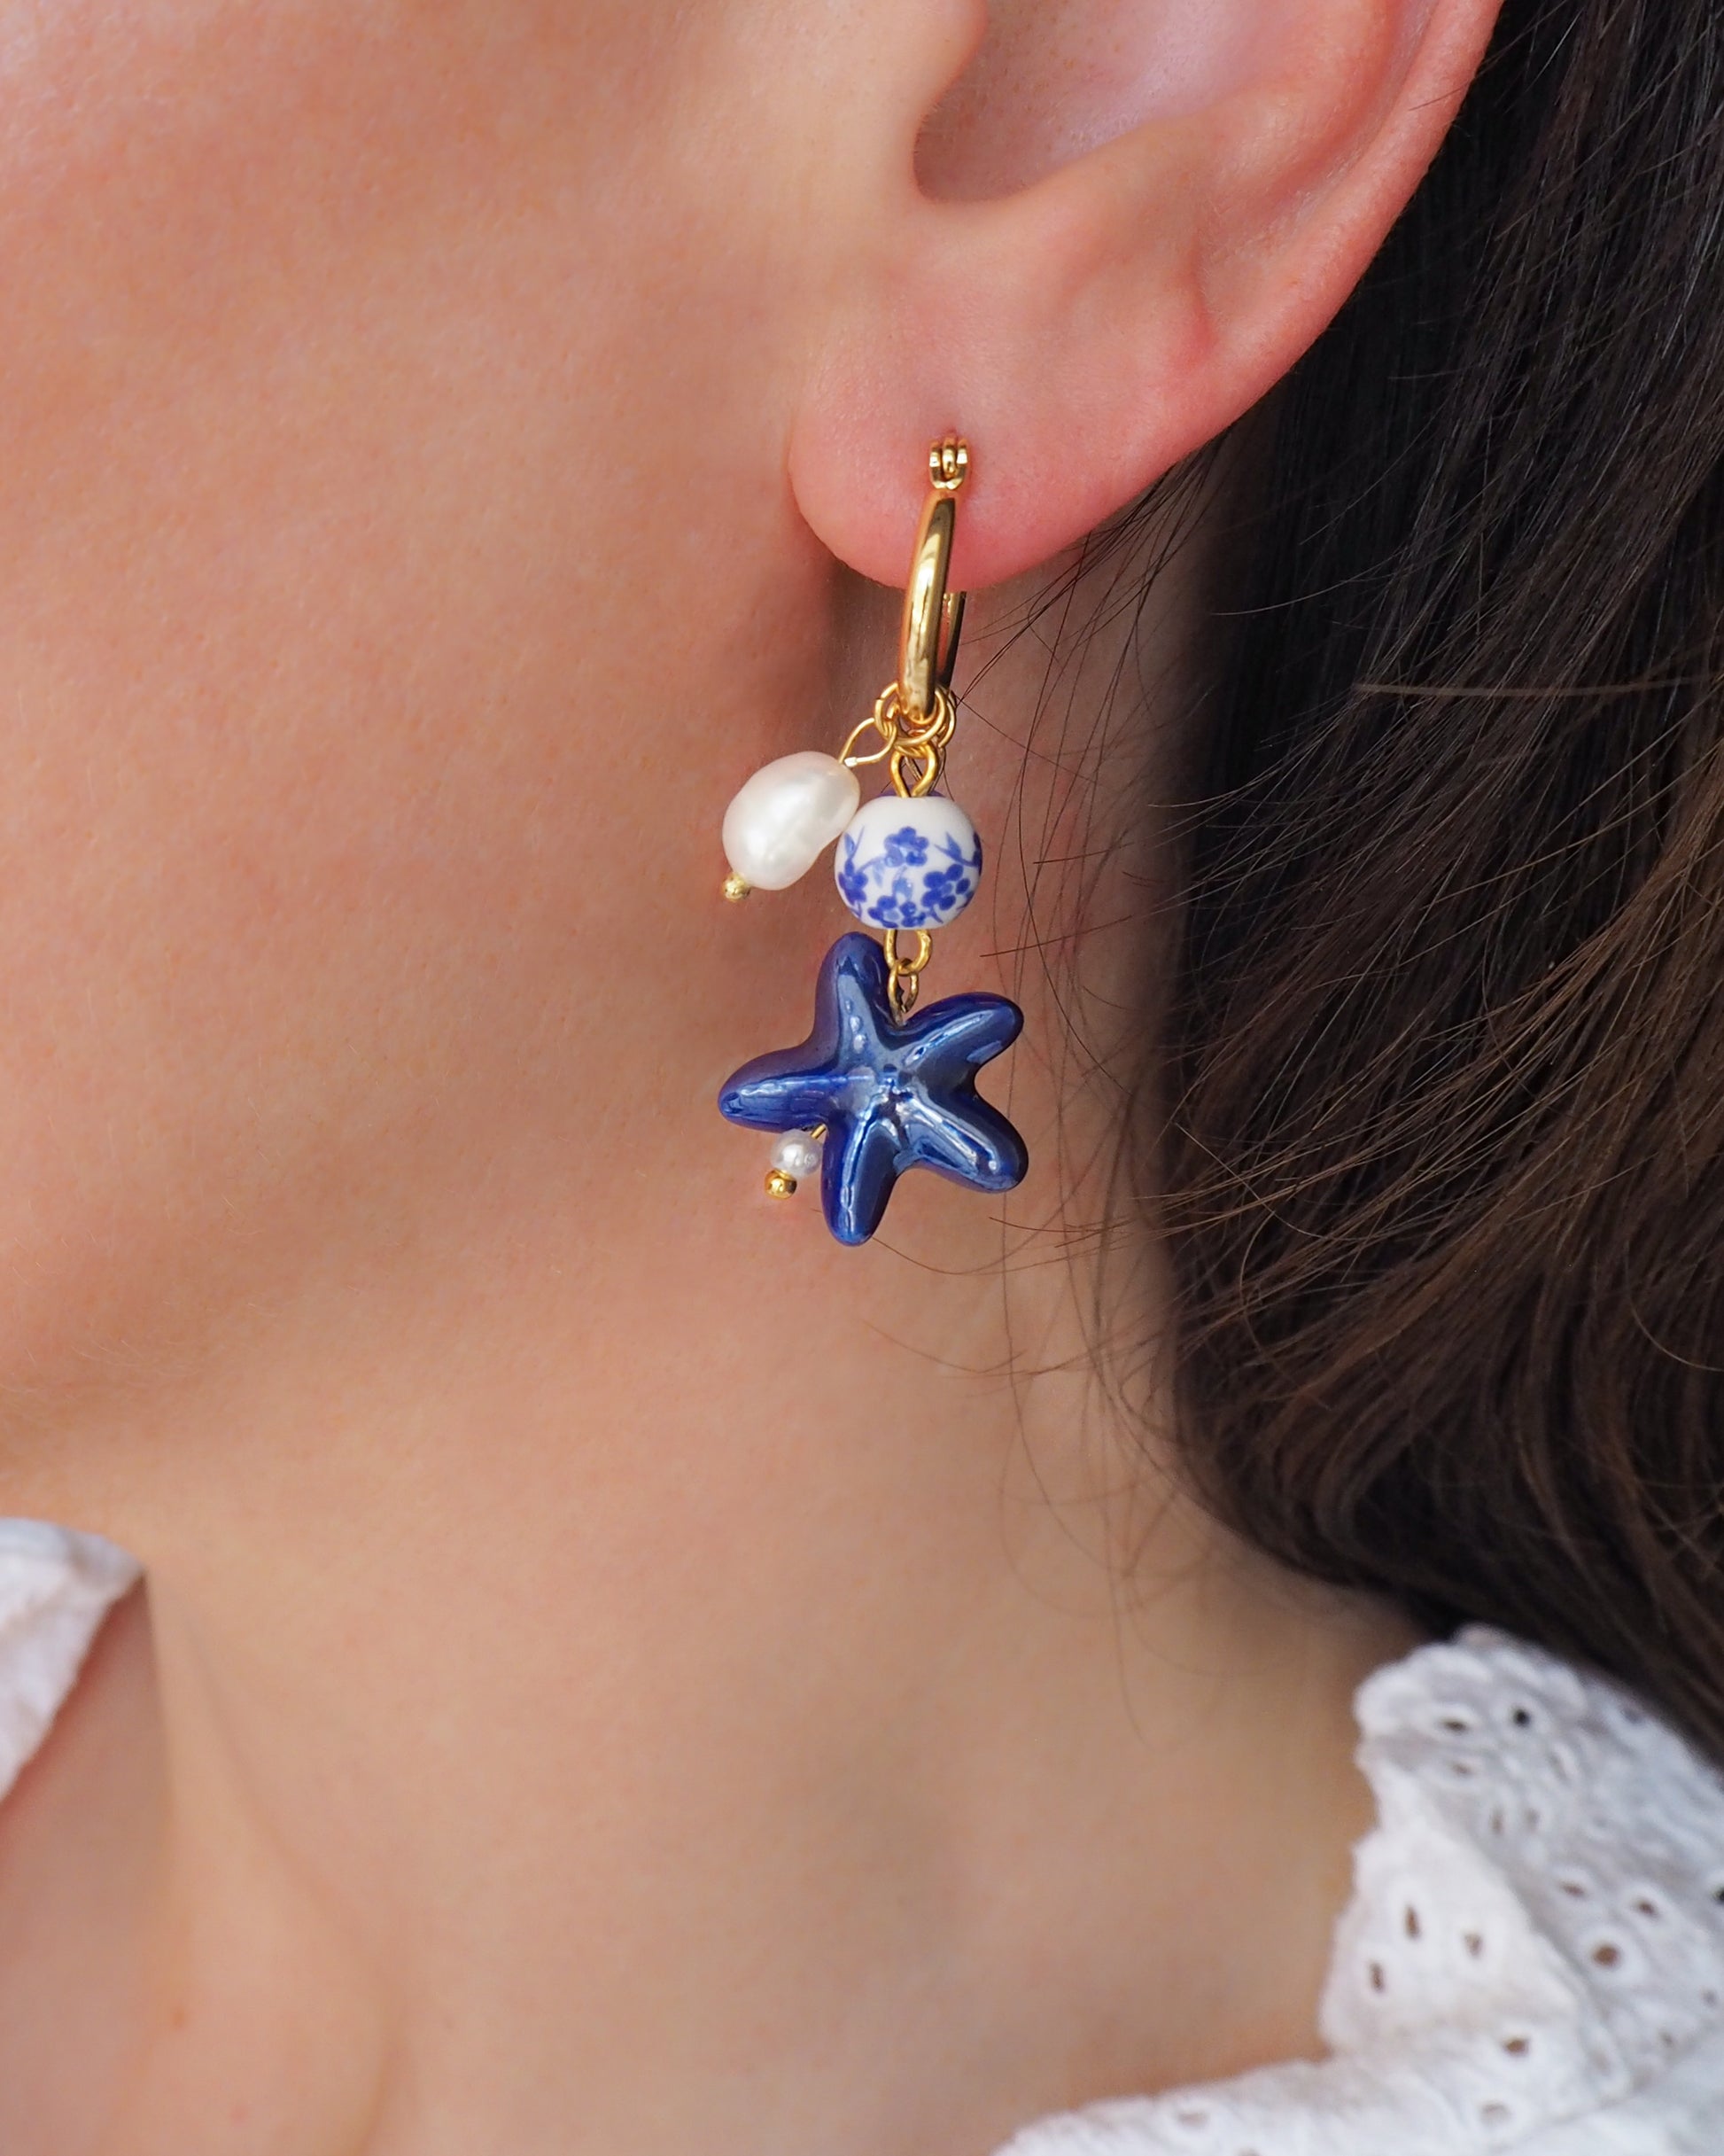 Model wearing Portuguese Blue Sea Star Starfish Gold Earrings with Azulejo Tile Beads, Freshwater Pearls and Gemstones - Handmade Ocean Inspired Jewelry